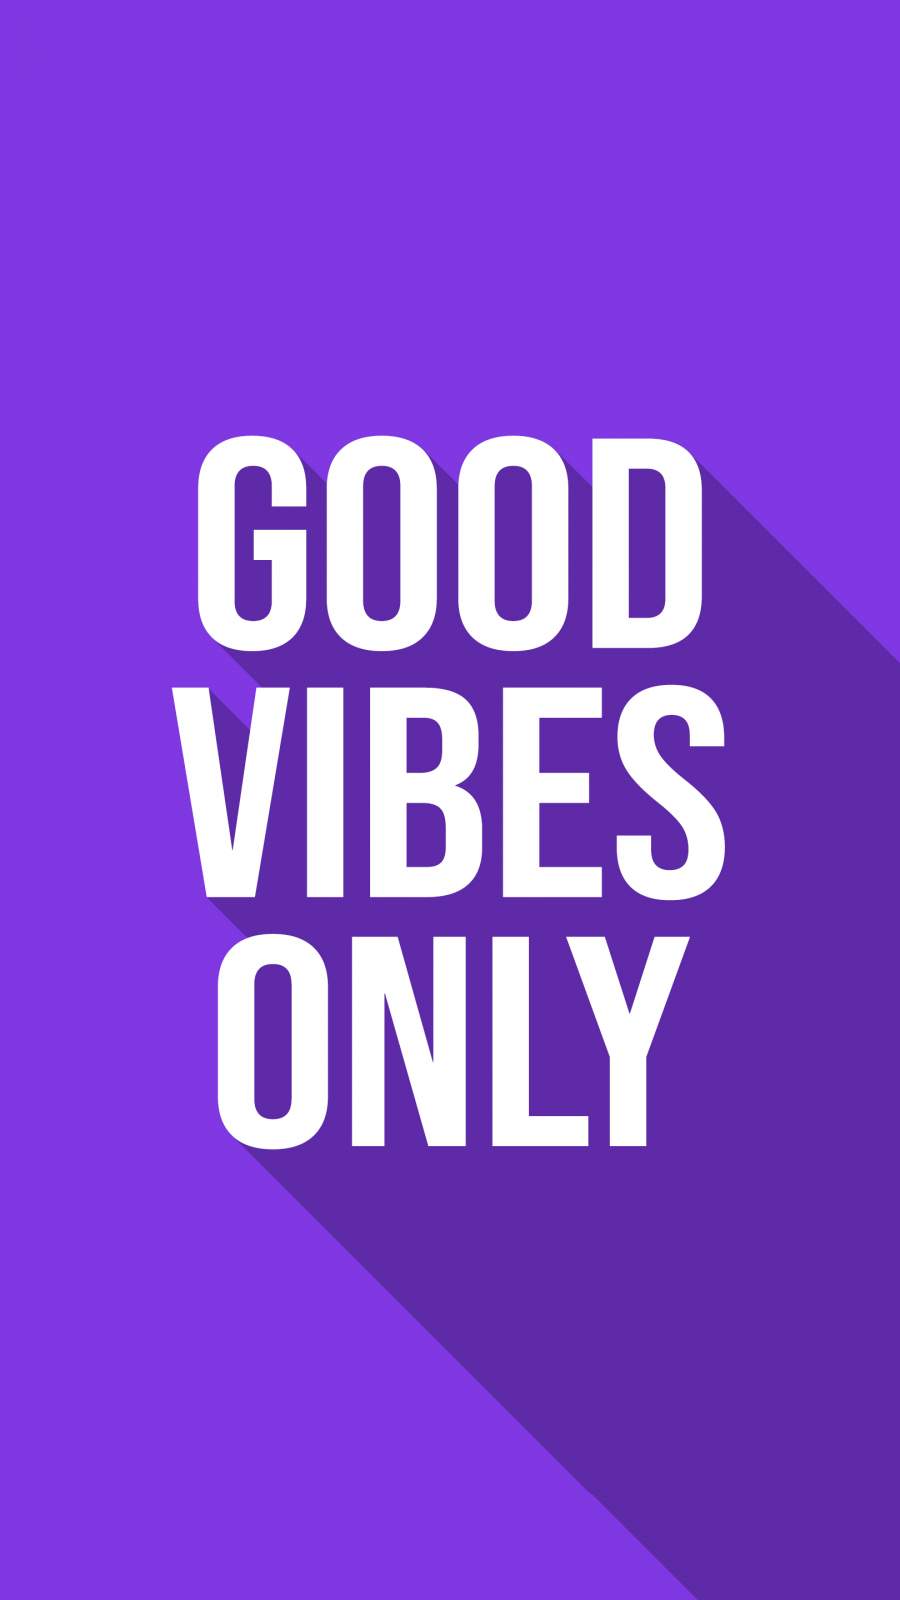 Positive Vibes Wallpapers